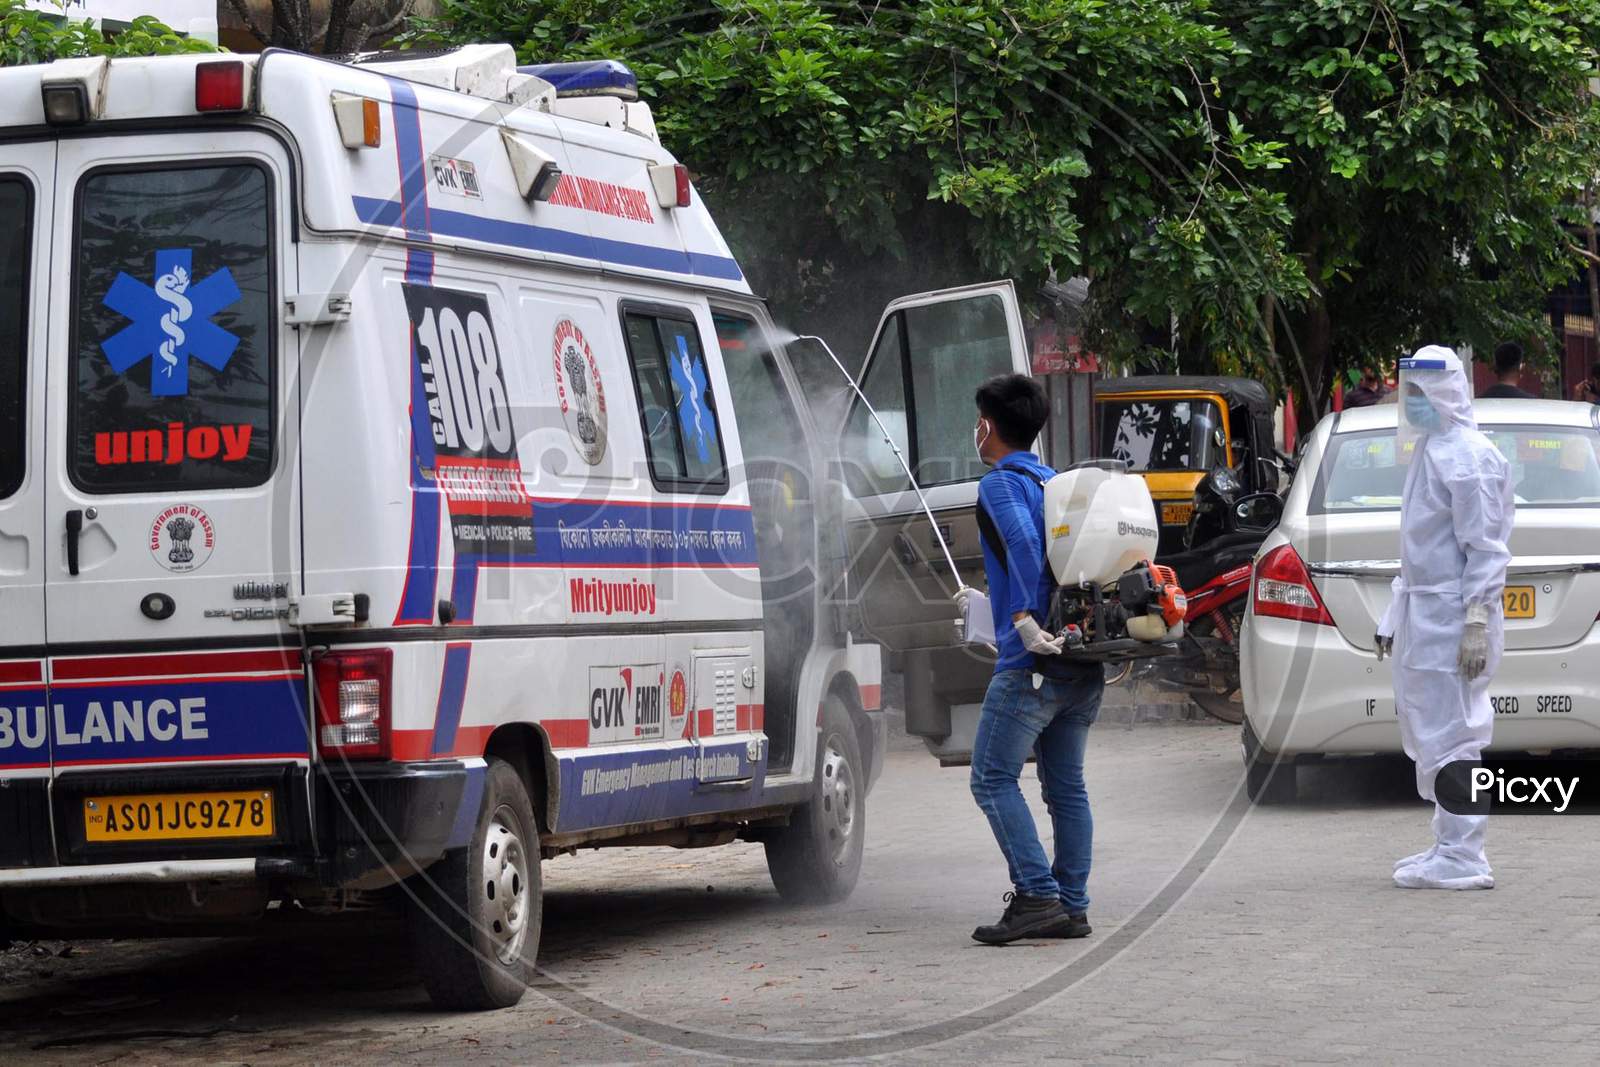 A health worker sprays disinfectant on an ambulance outside a government hospital in Guwahati, Assam on July 06, 2020.